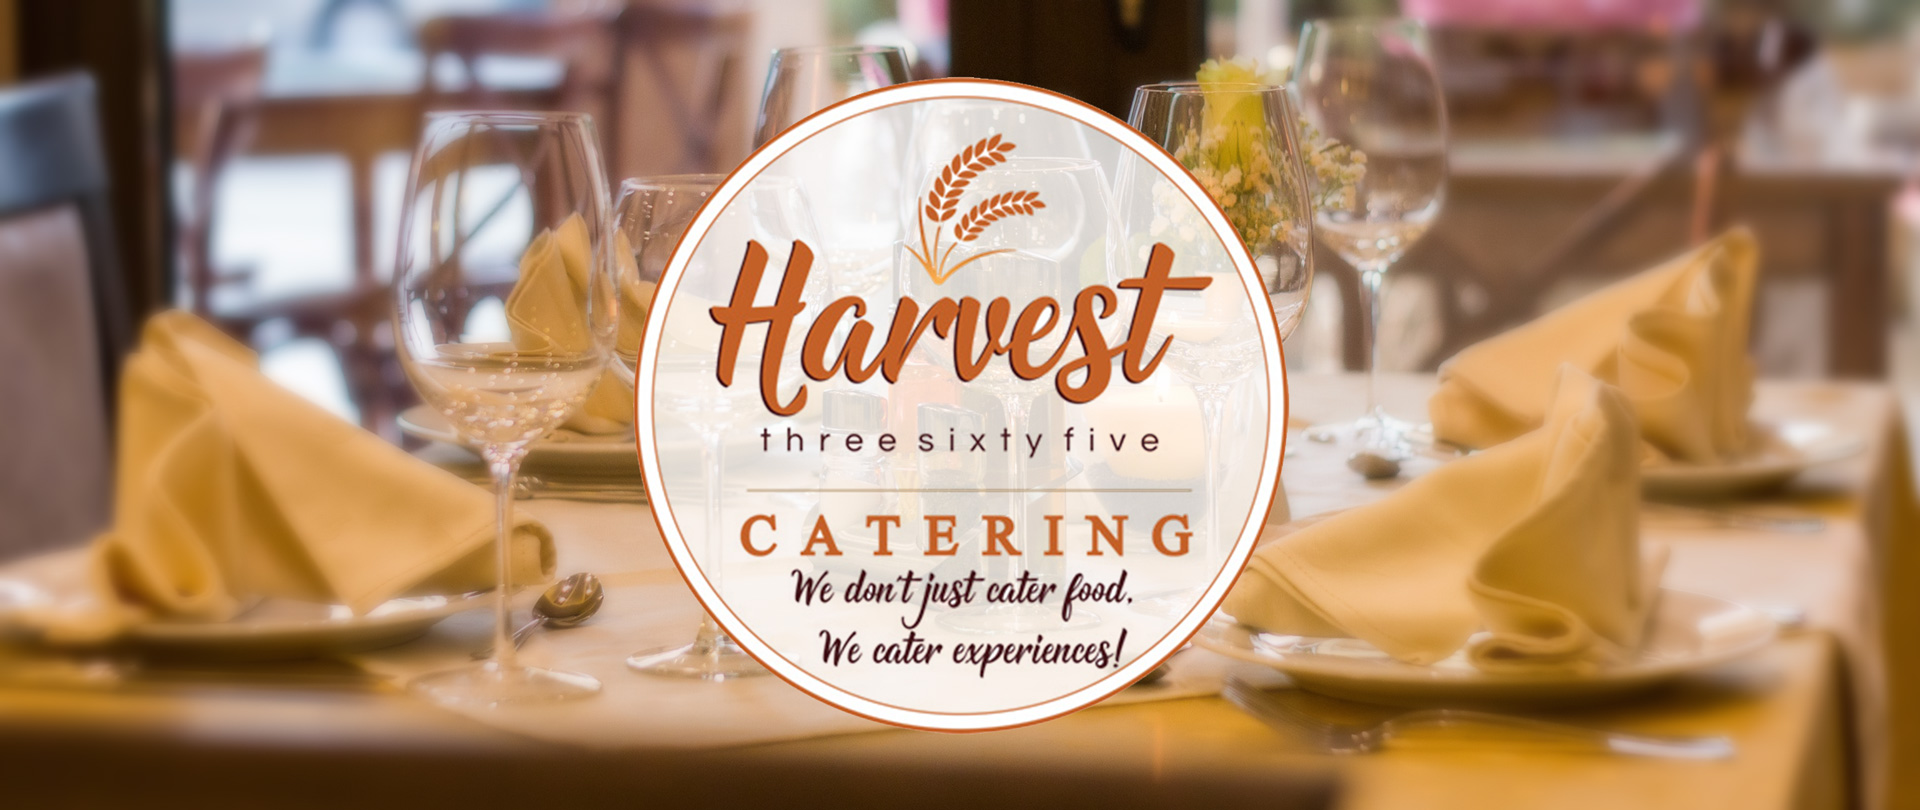 Harvest 365 Catering